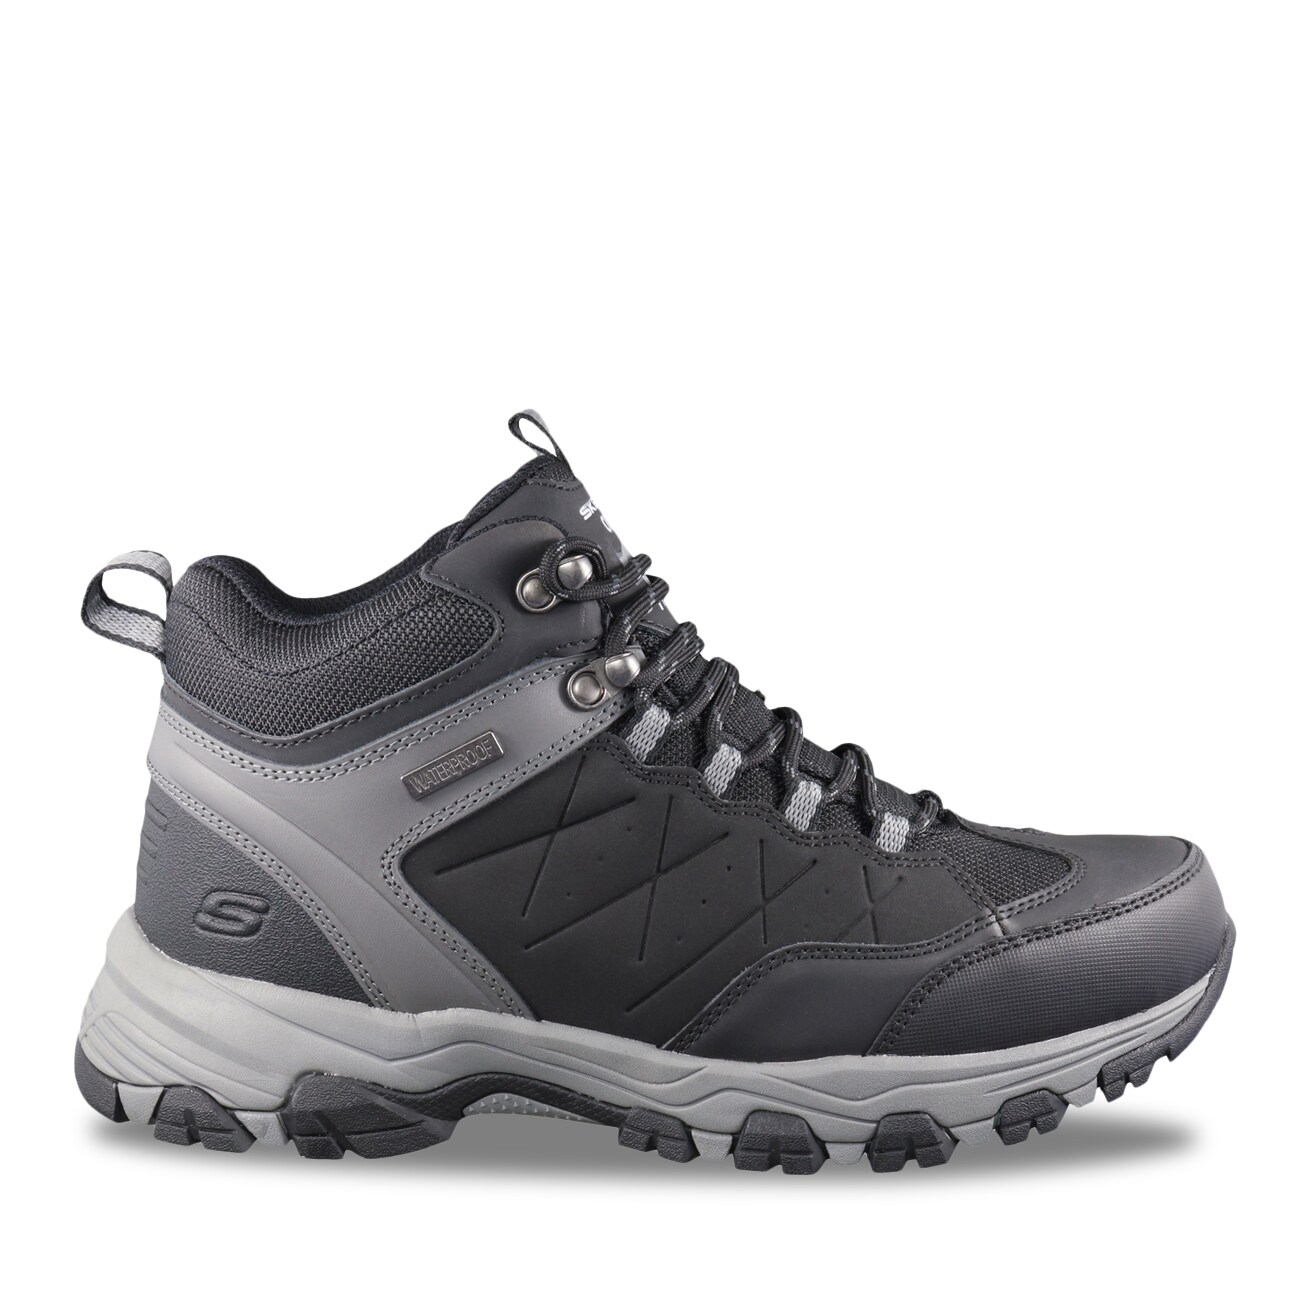 black friday deals on hiking boots